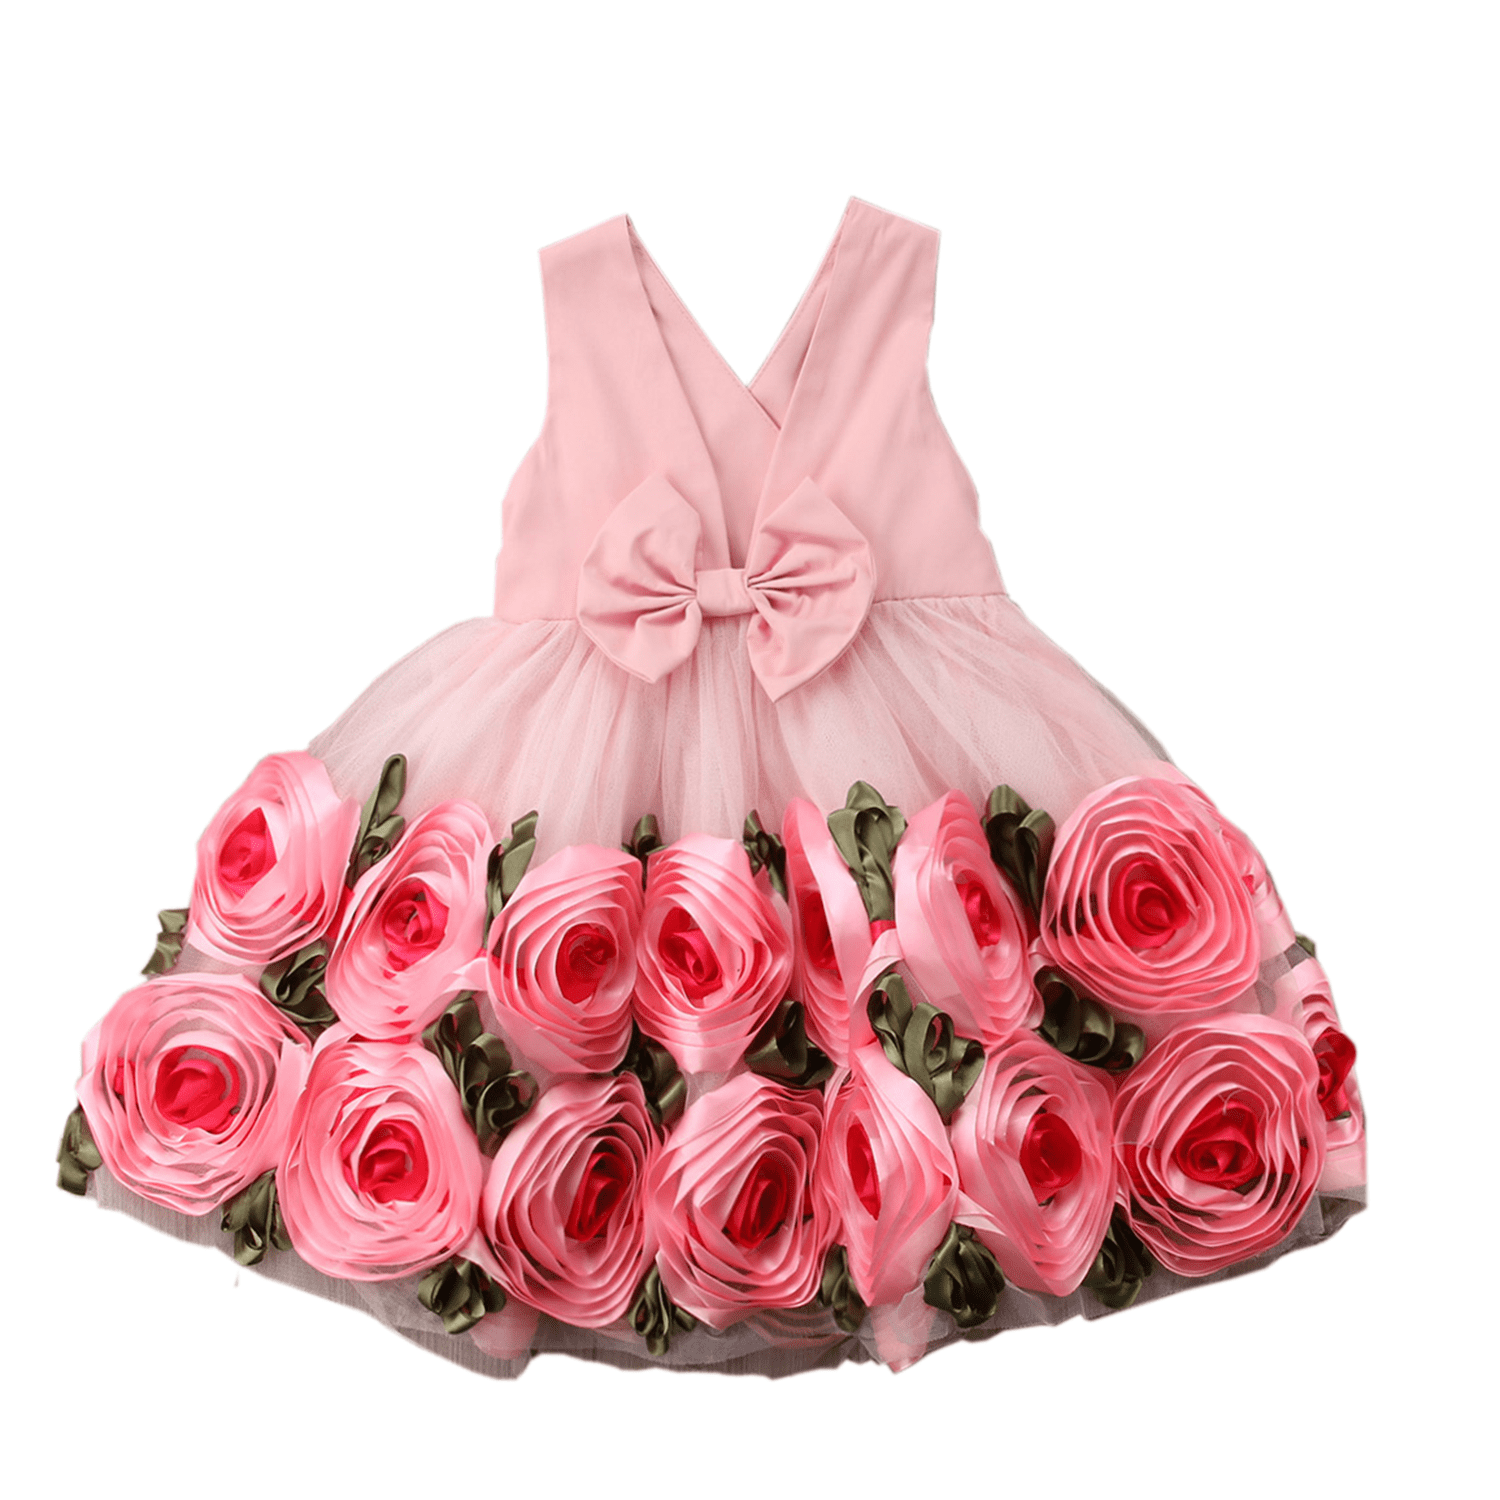 Girls dress with little pink roses Flower dress with ruffled tulle Birthday gift for daughter